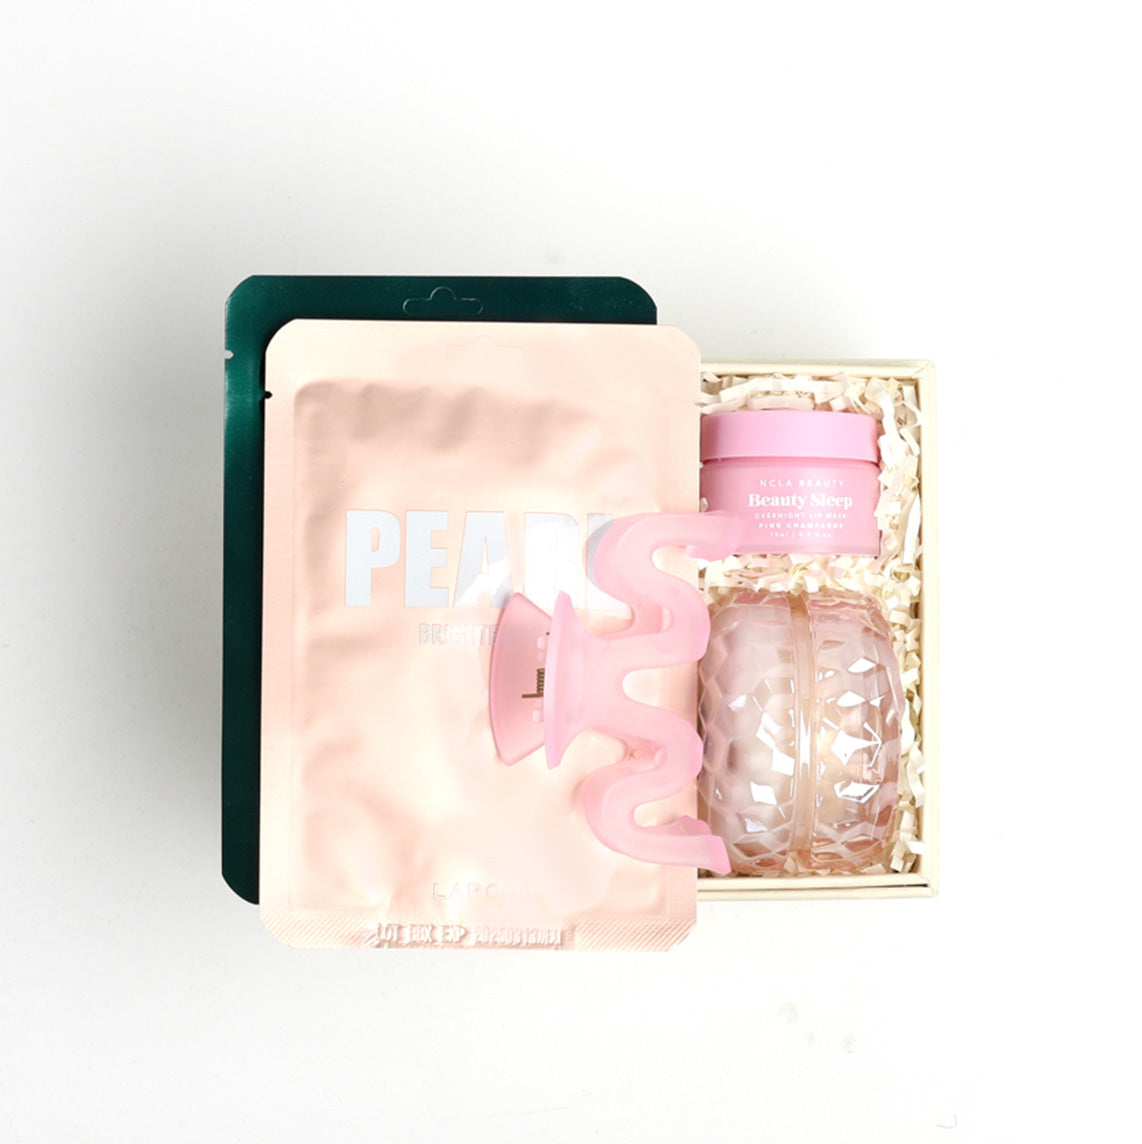 Mini Creme BOXFOX gift box packed with 2 lapcos face masks, a pink squiggle hair clip, and ncla lip mask